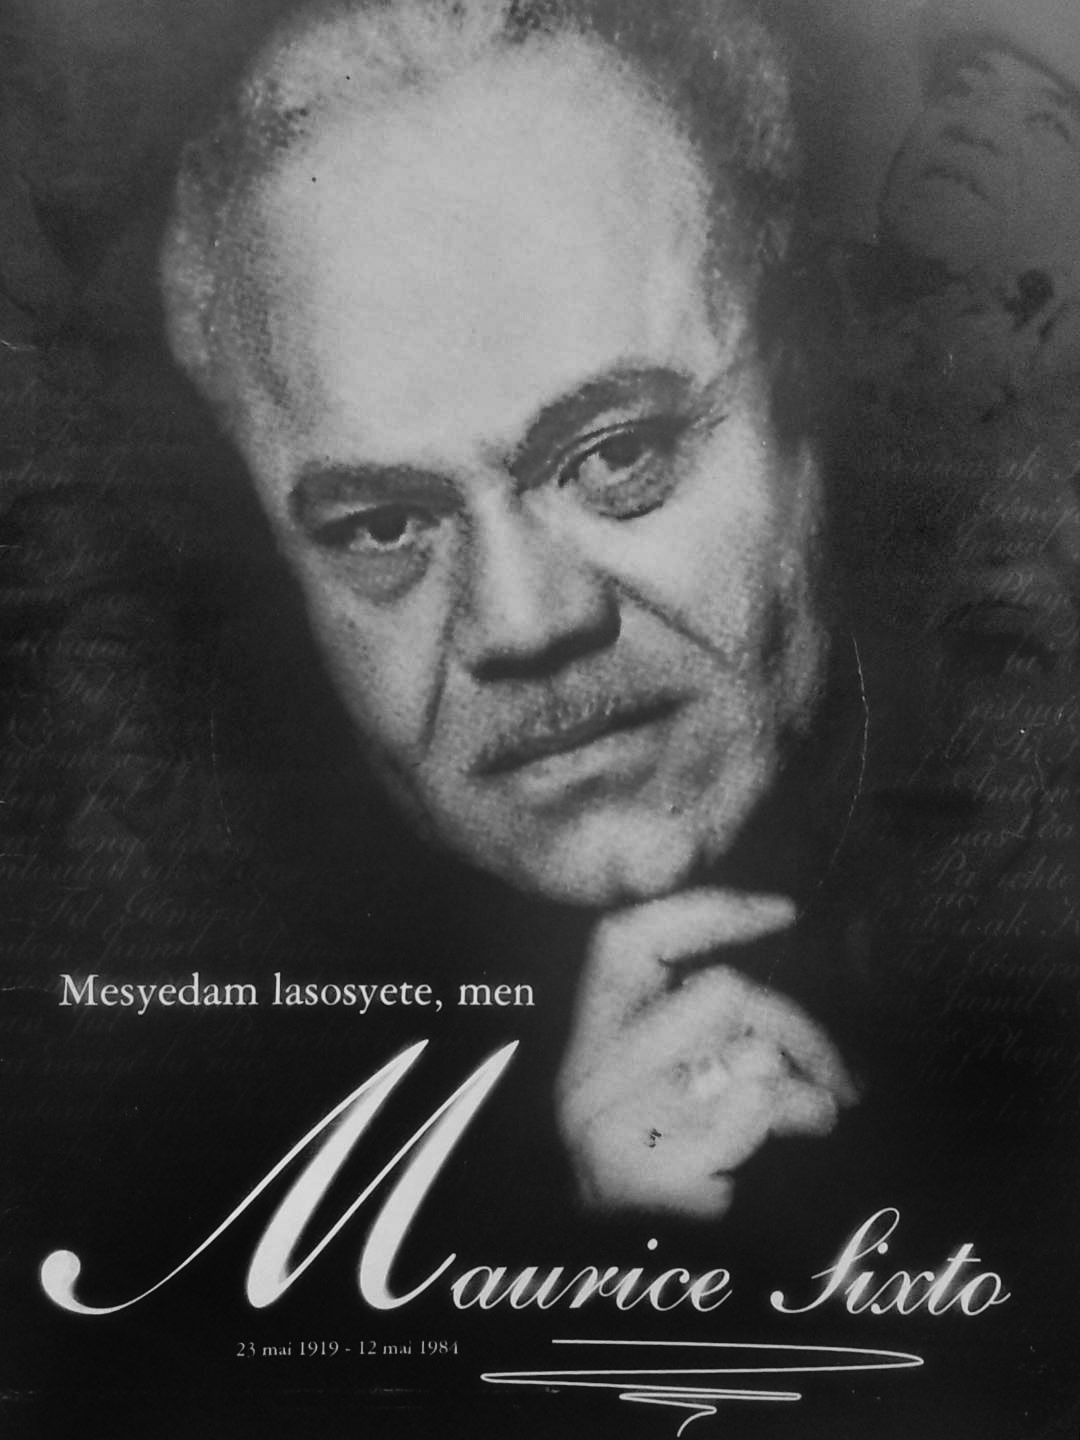 Reproduction of the DVD cover entitled “Here’s Maurice Sixto: The Great Eternal Front Luminous”.